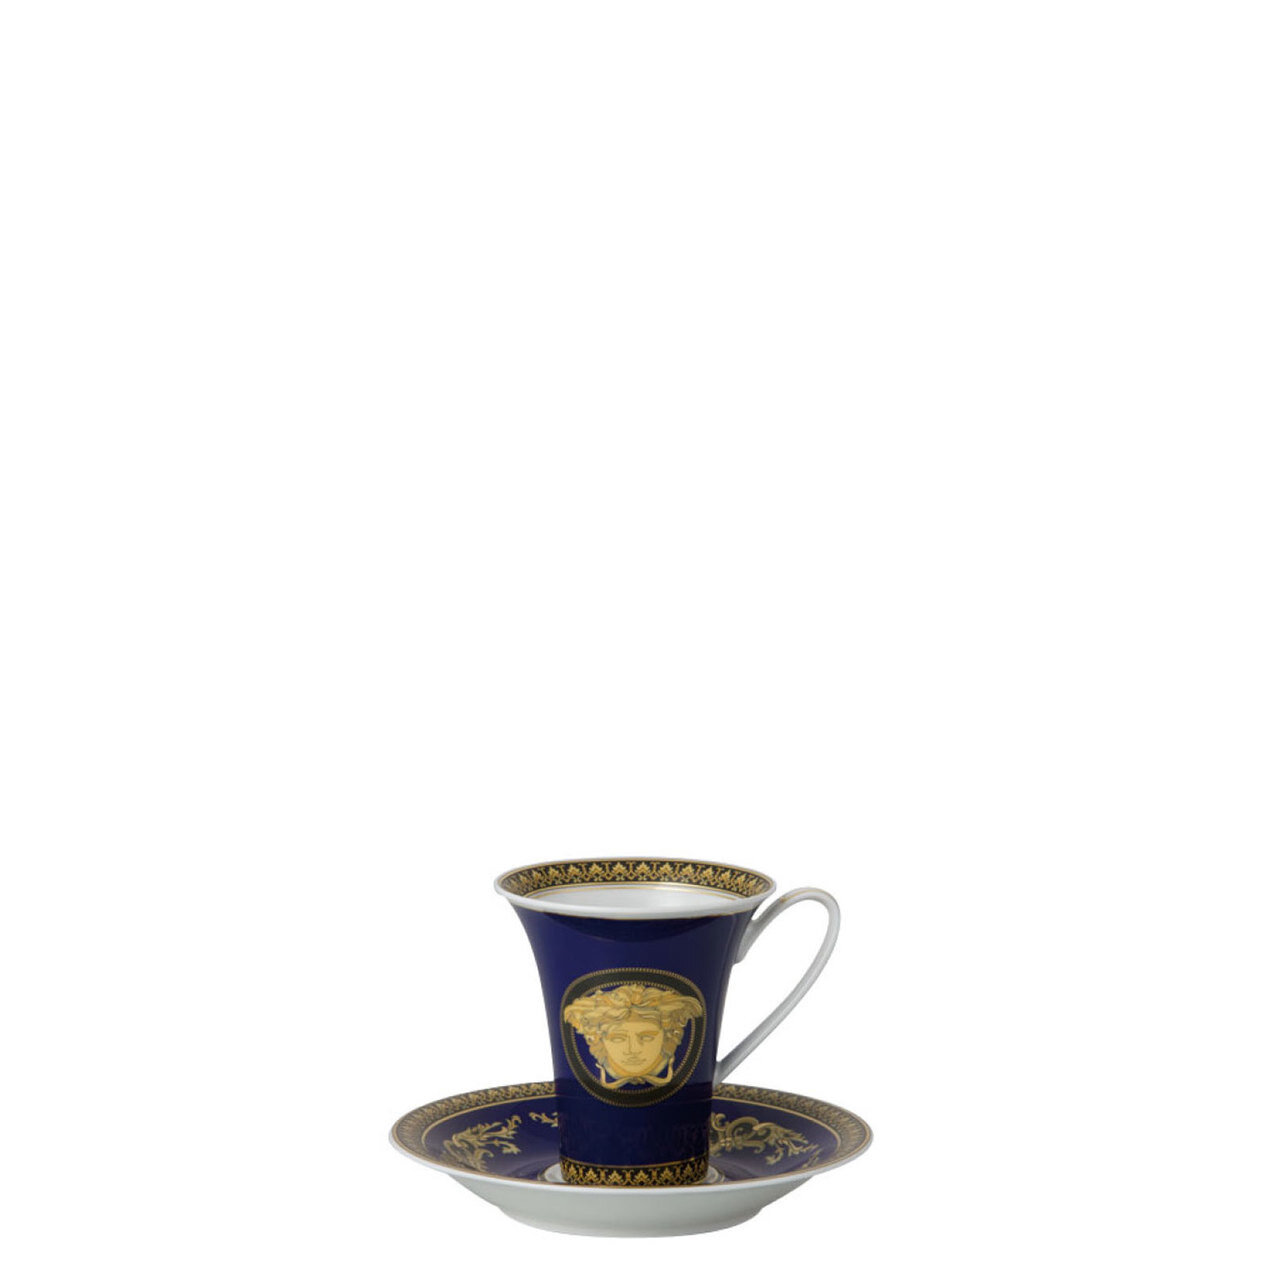 Versace Medusa Blue Coffee Cup and Saucer 6 Inch 6 oz.